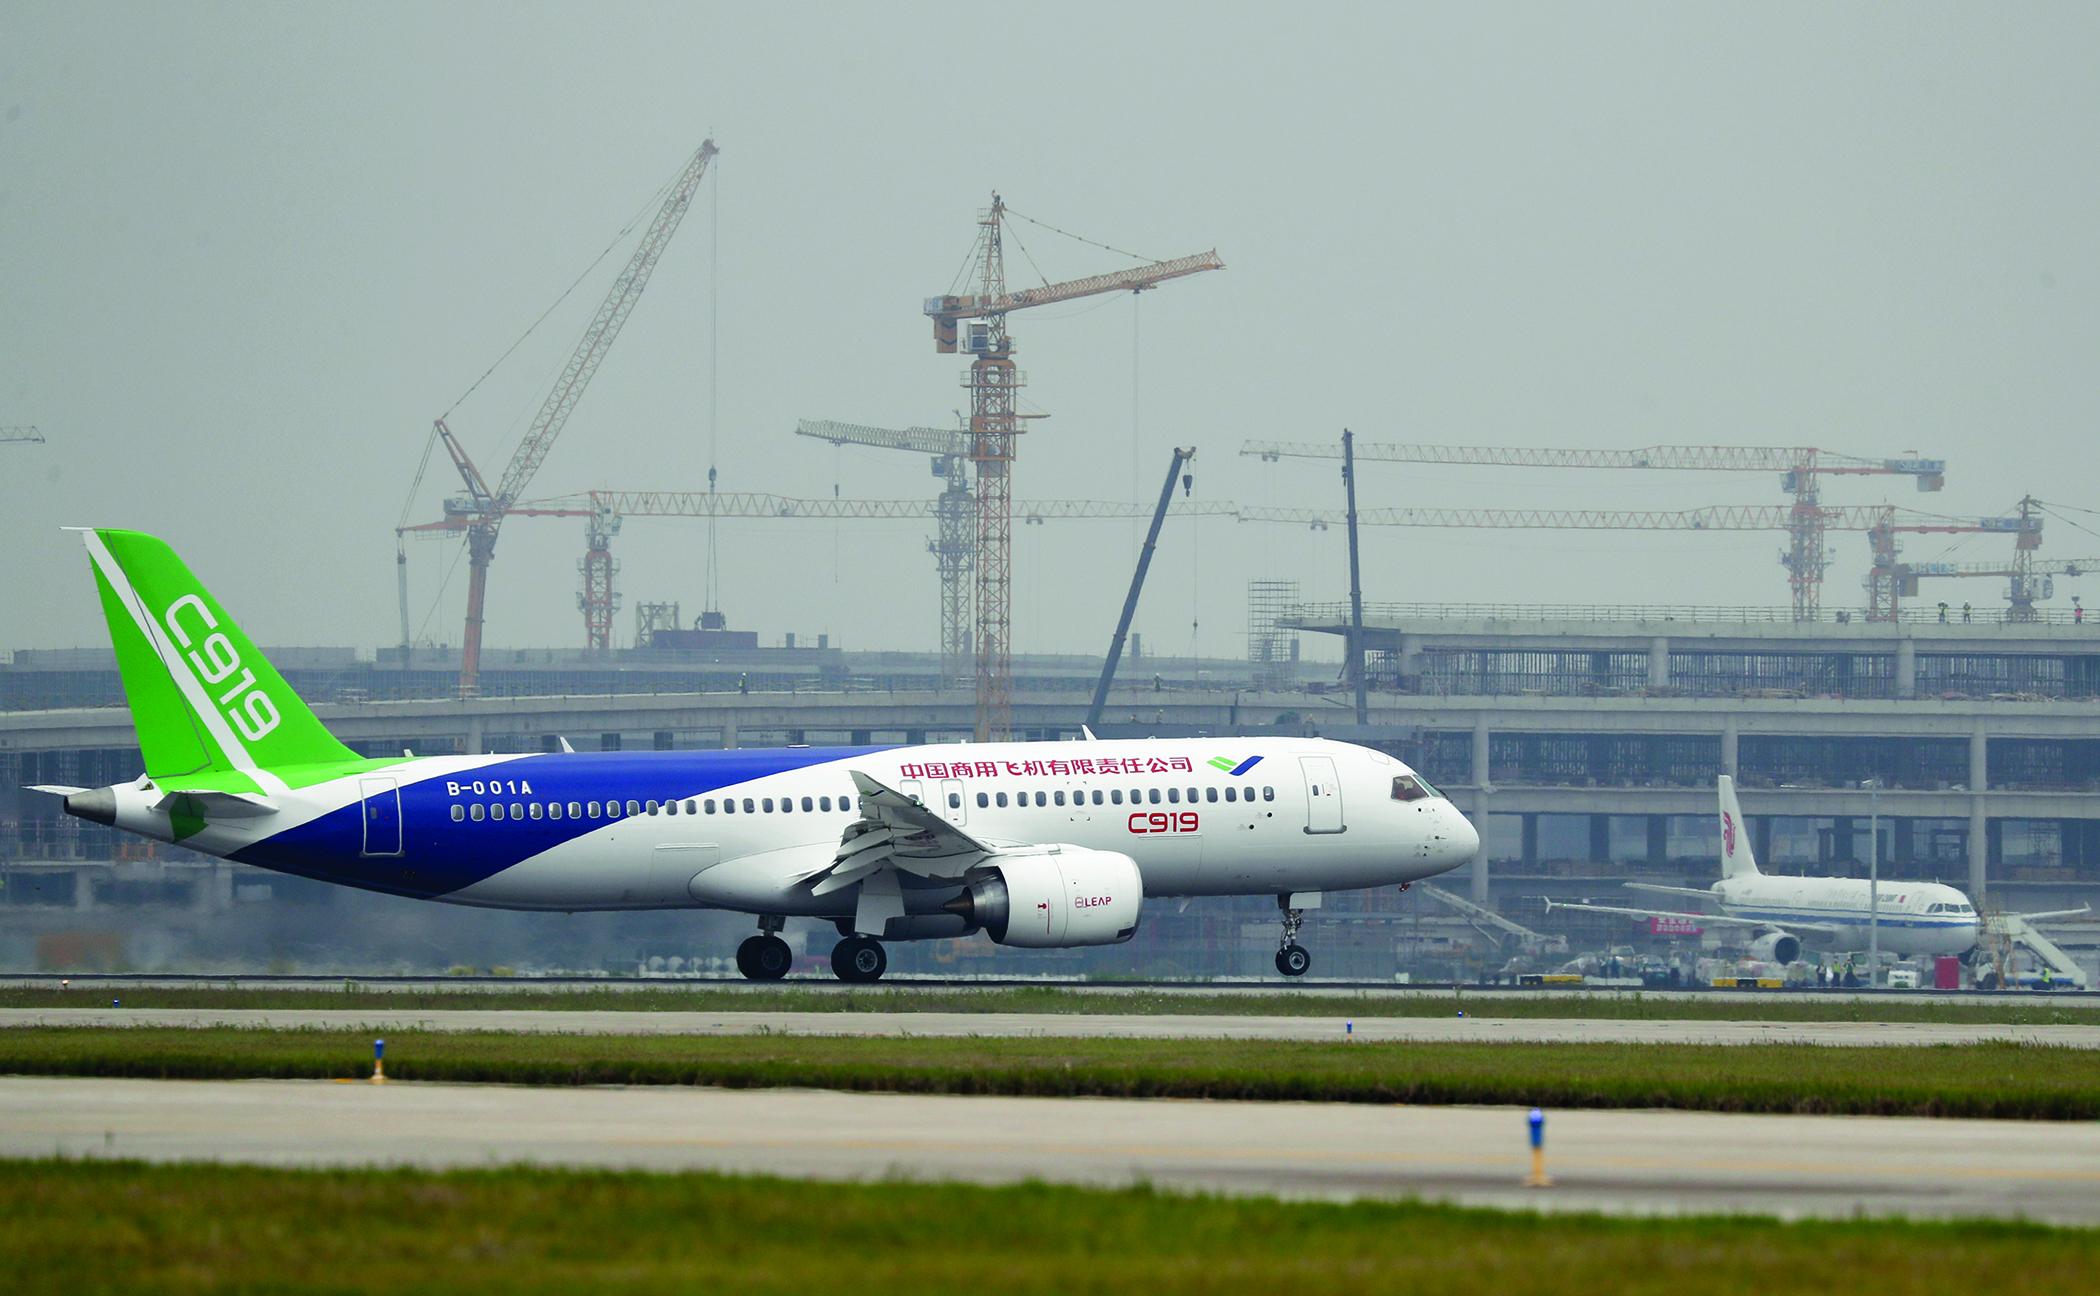 Comac C919 narrow body airliner